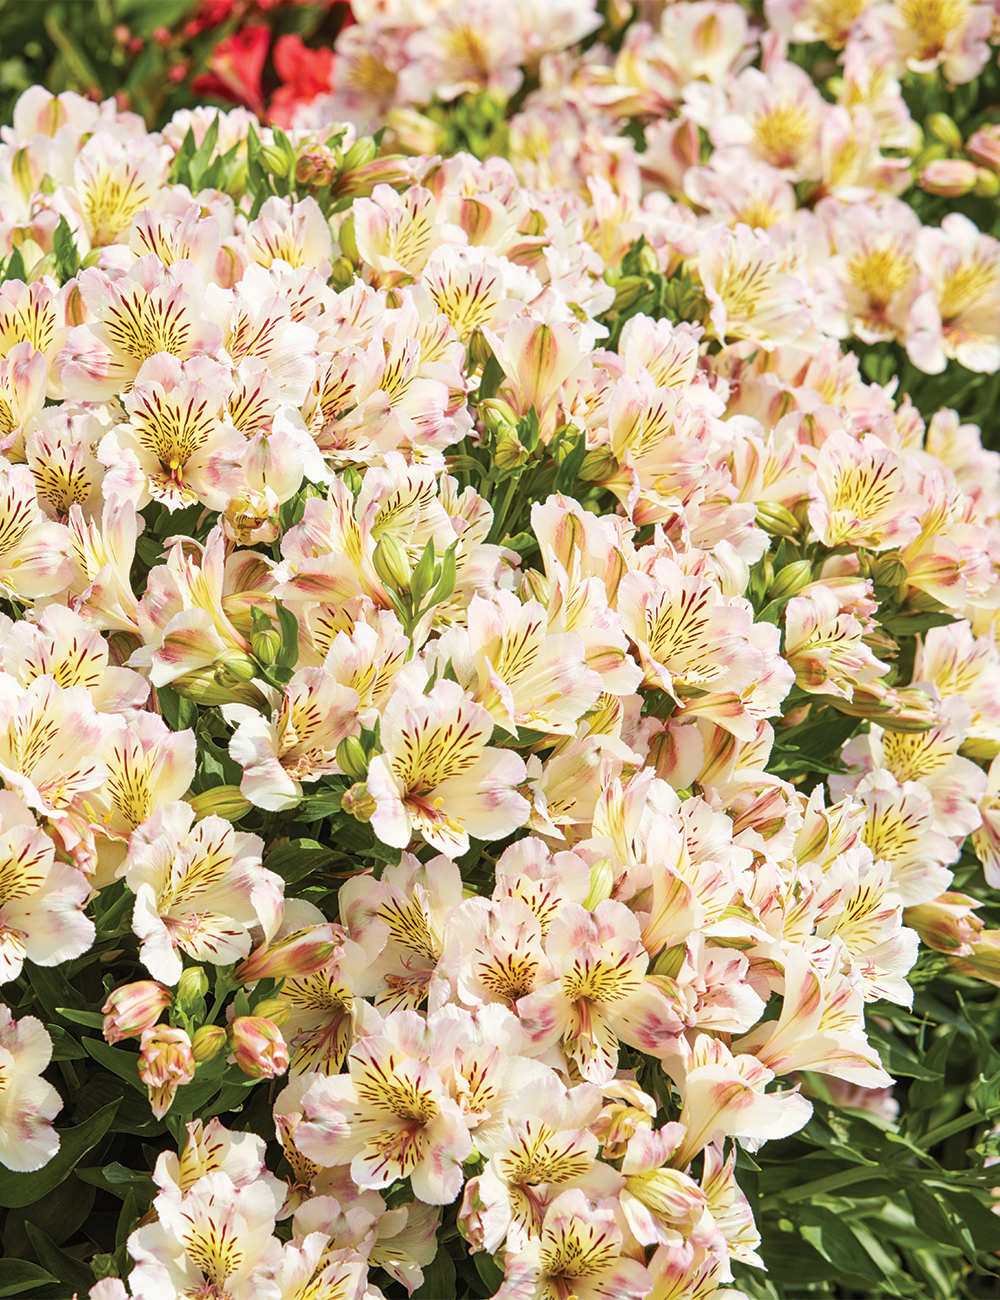 Peruvian Lily Summer Paradise 'Time Valley'